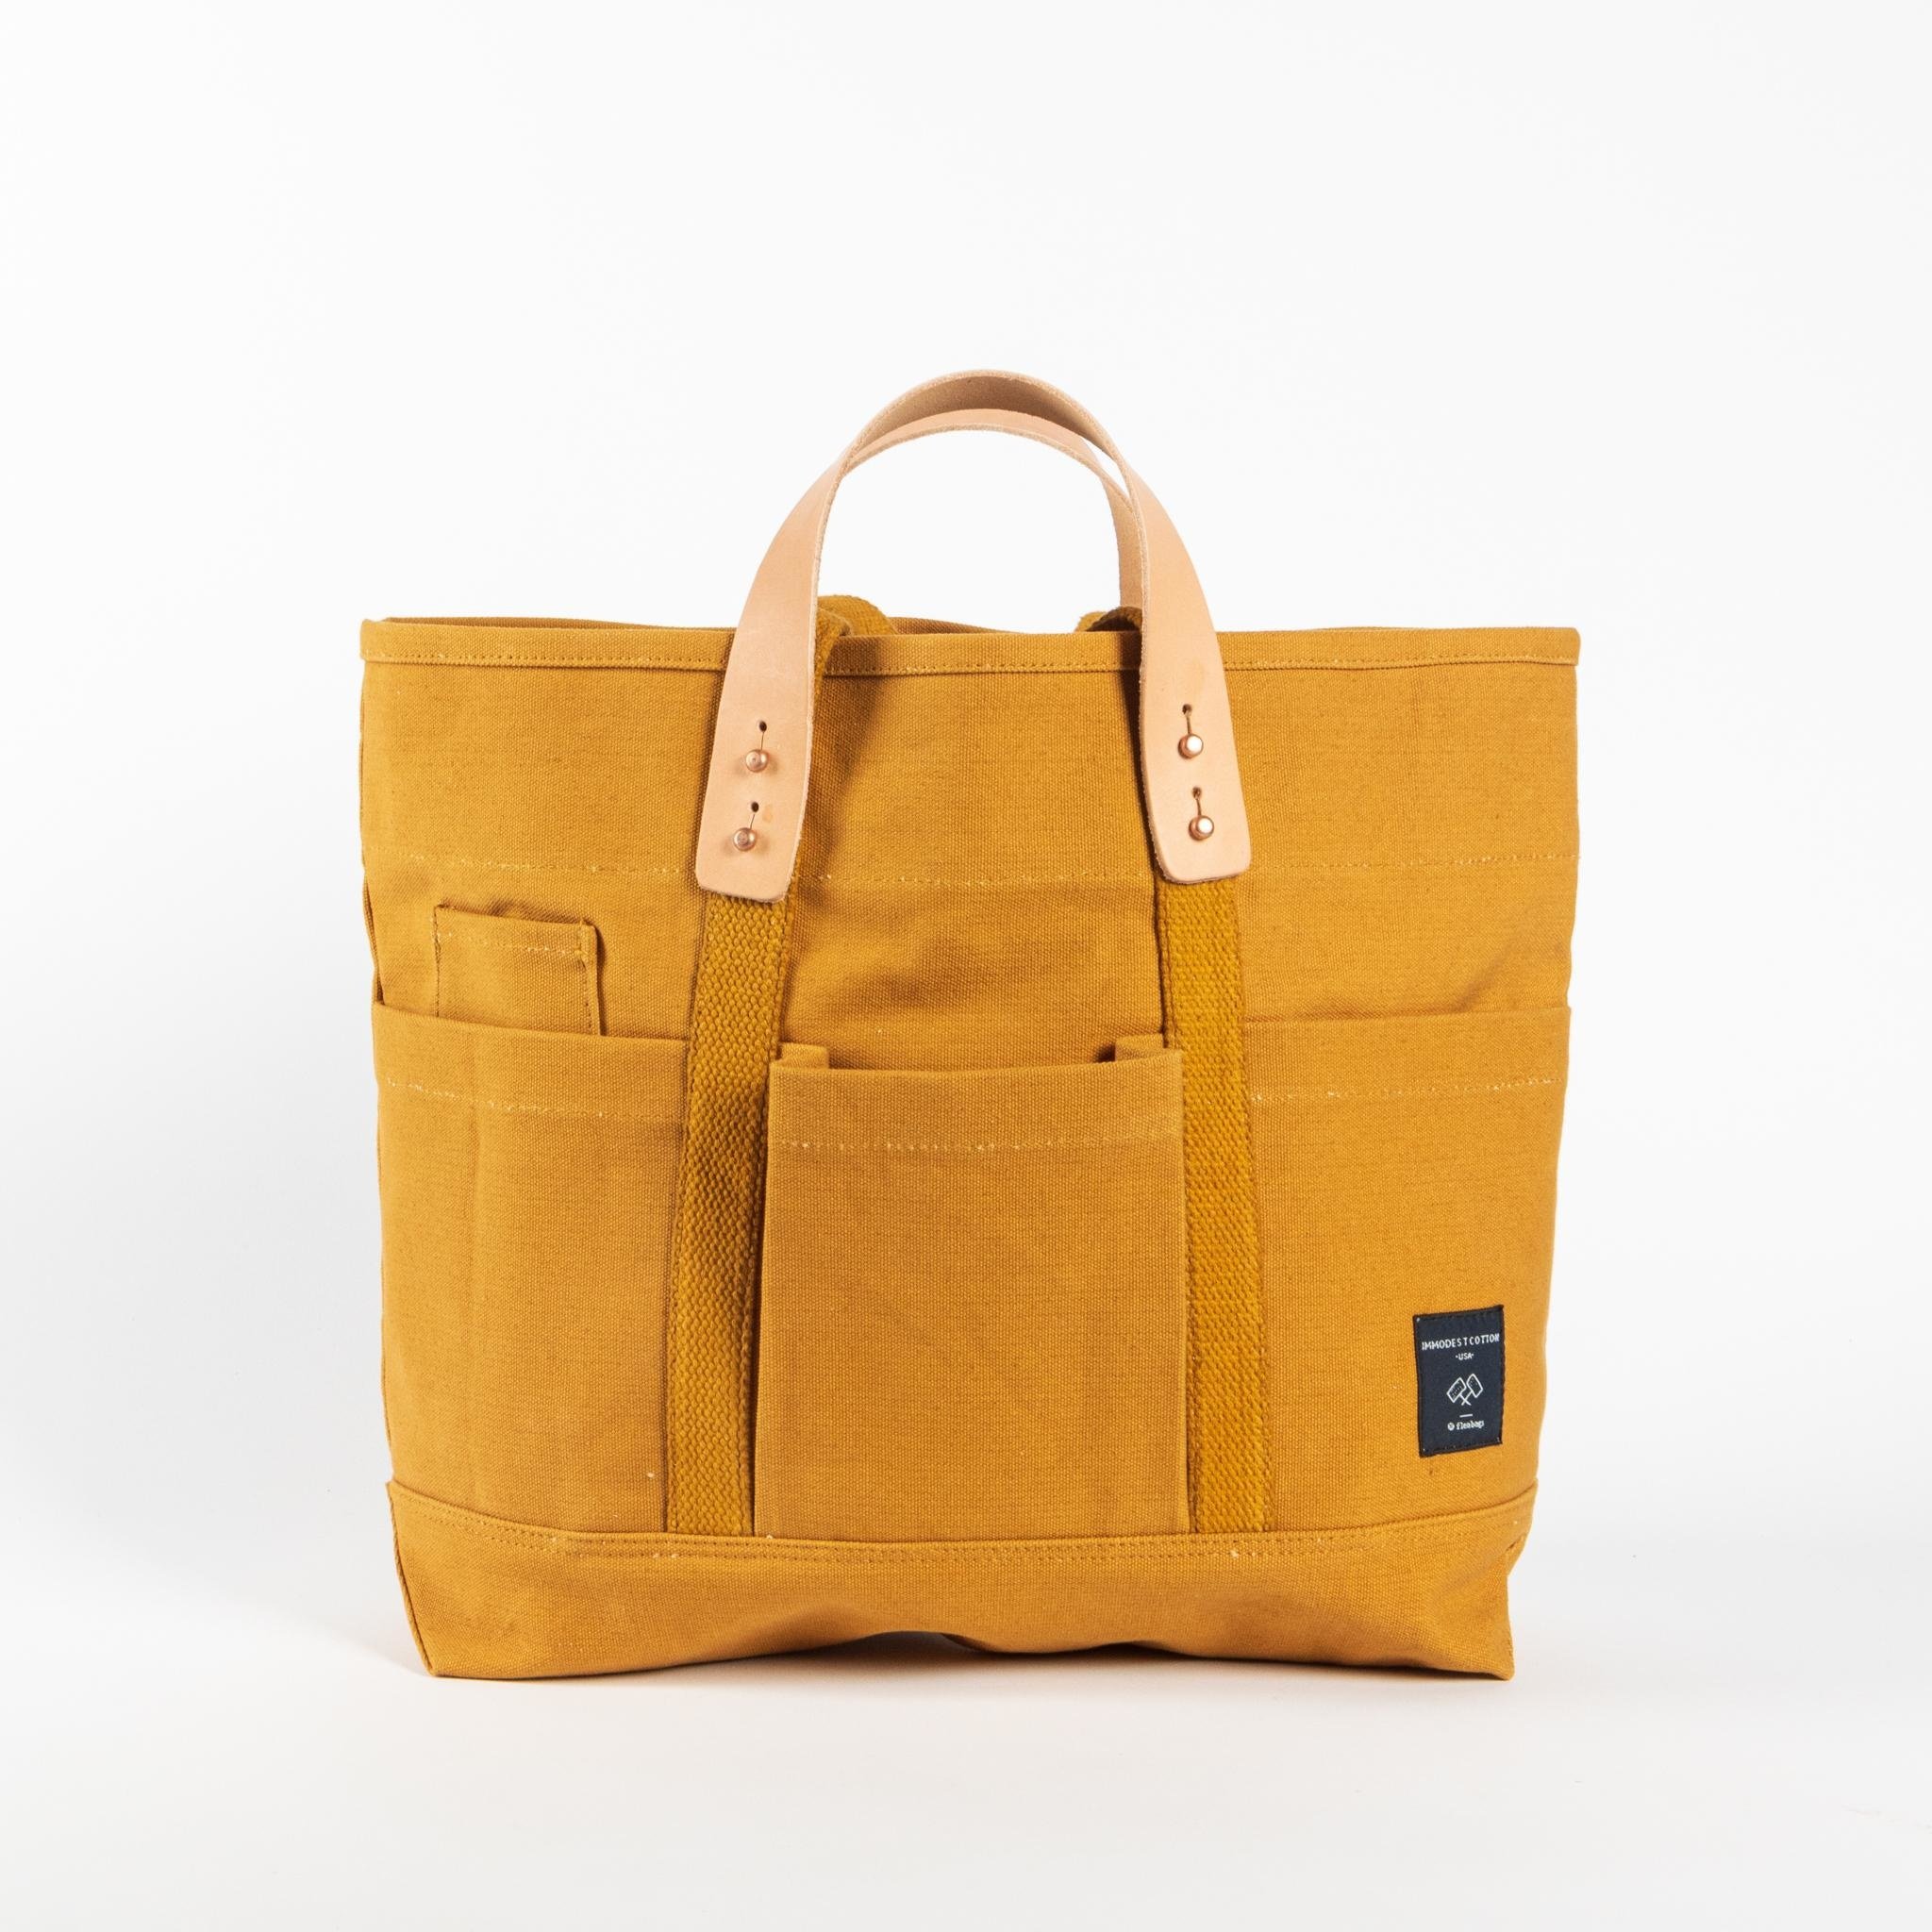 IMMODEST COTTON - Construction Tote in Mustard Seed